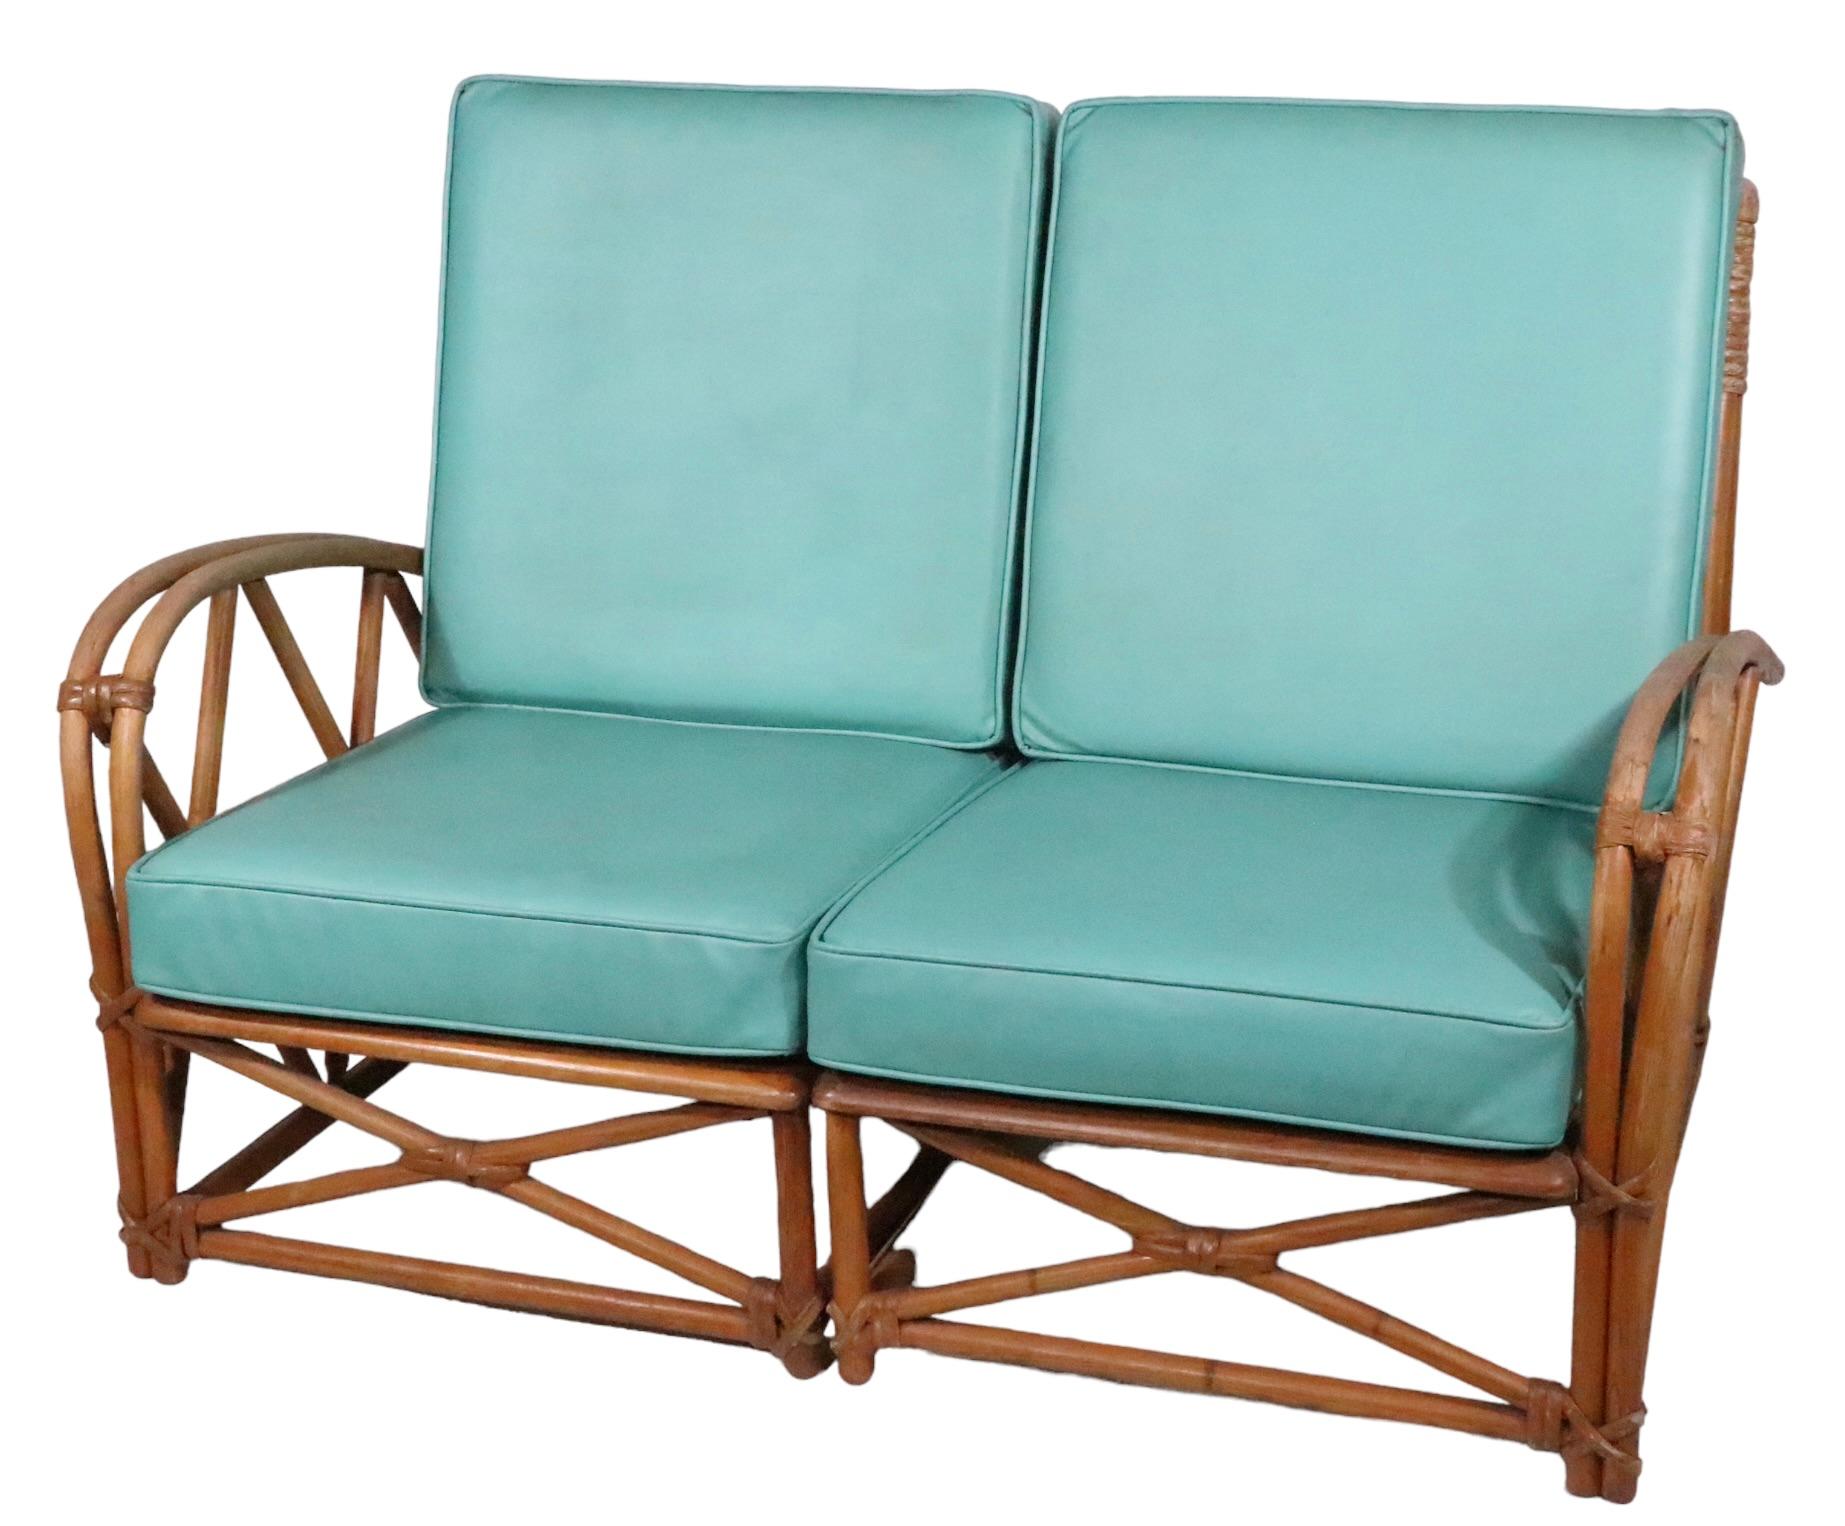  Mid Century Bentwood Bamboo Style Loveseat Sofa by Heywood Wakefield c. 1950's For Sale 10